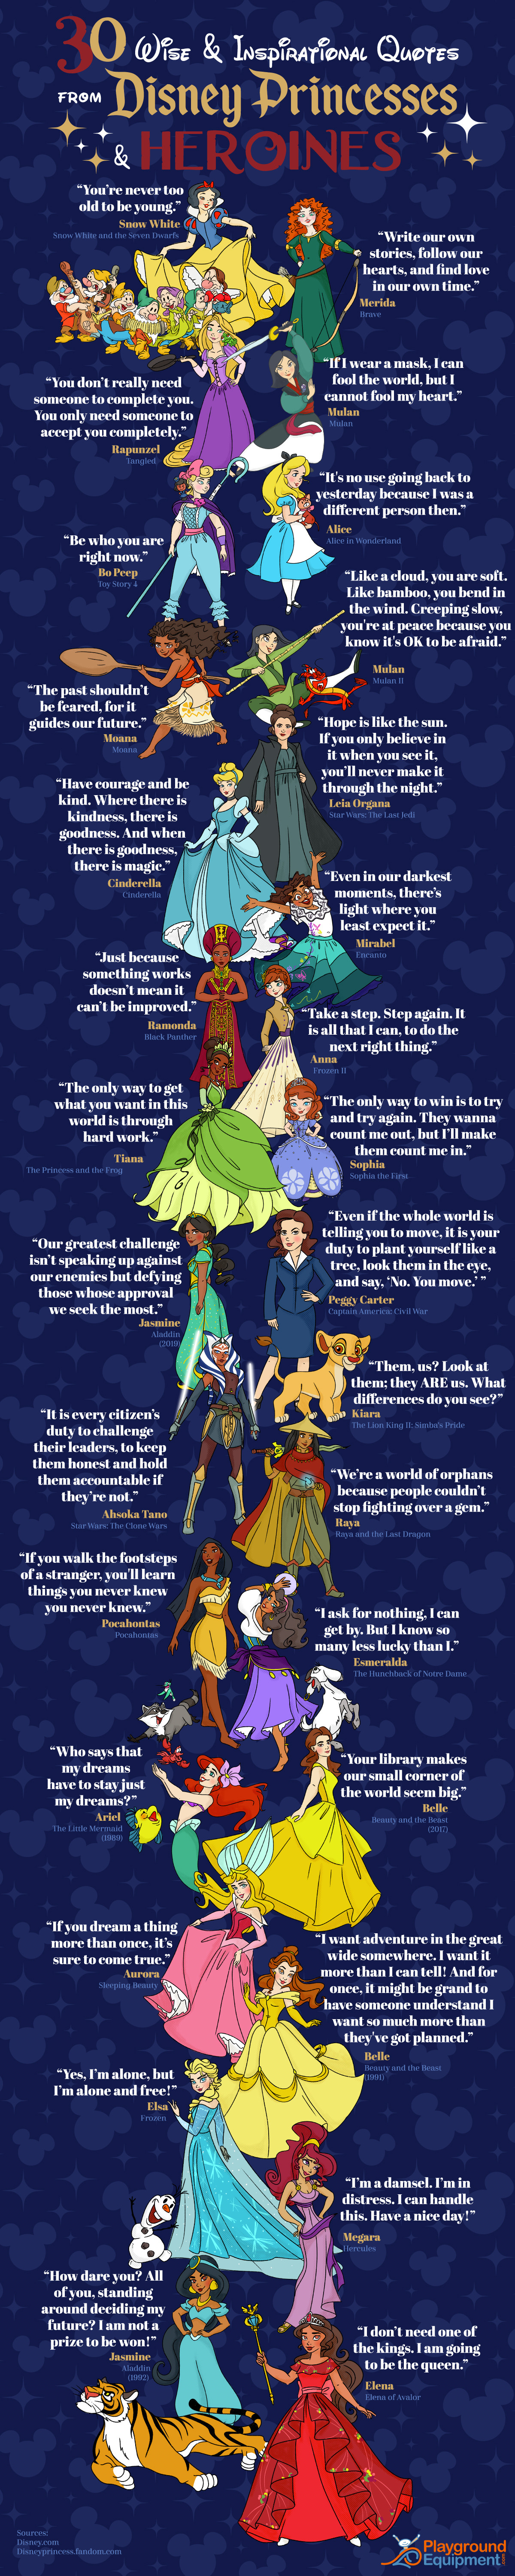 30 Wise & Inspirational Quotes from Disney Princesses and Heroines - PlaygroundEquipment.com - Infographic